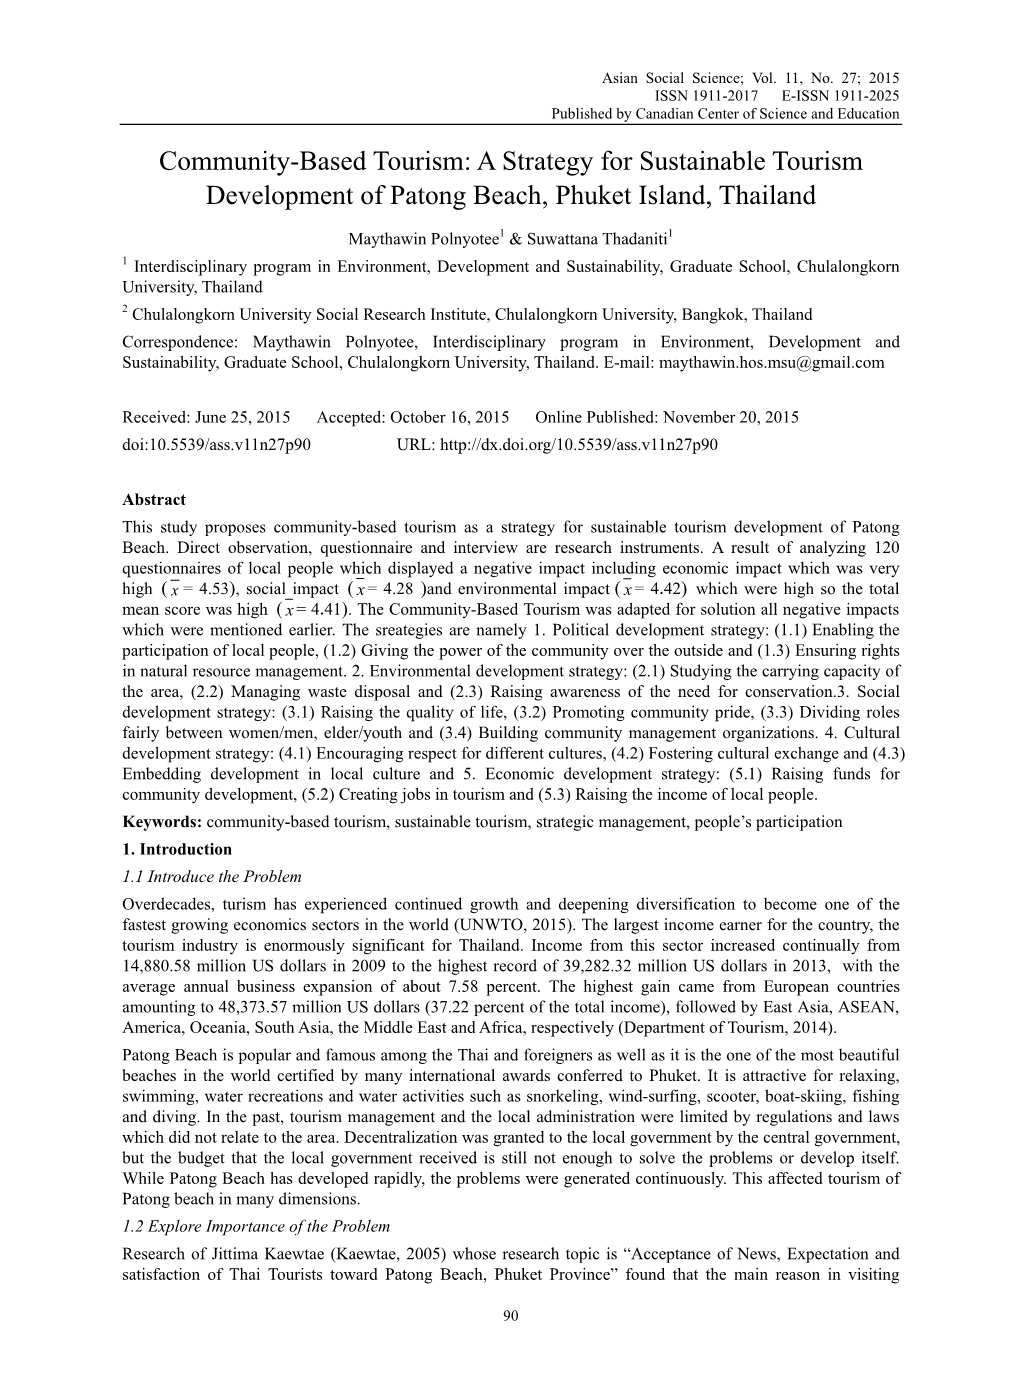 Community-Based Tourism: a Strategy for Sustainable Tourism Development of Patong Beach, Phuket Island, Thailand